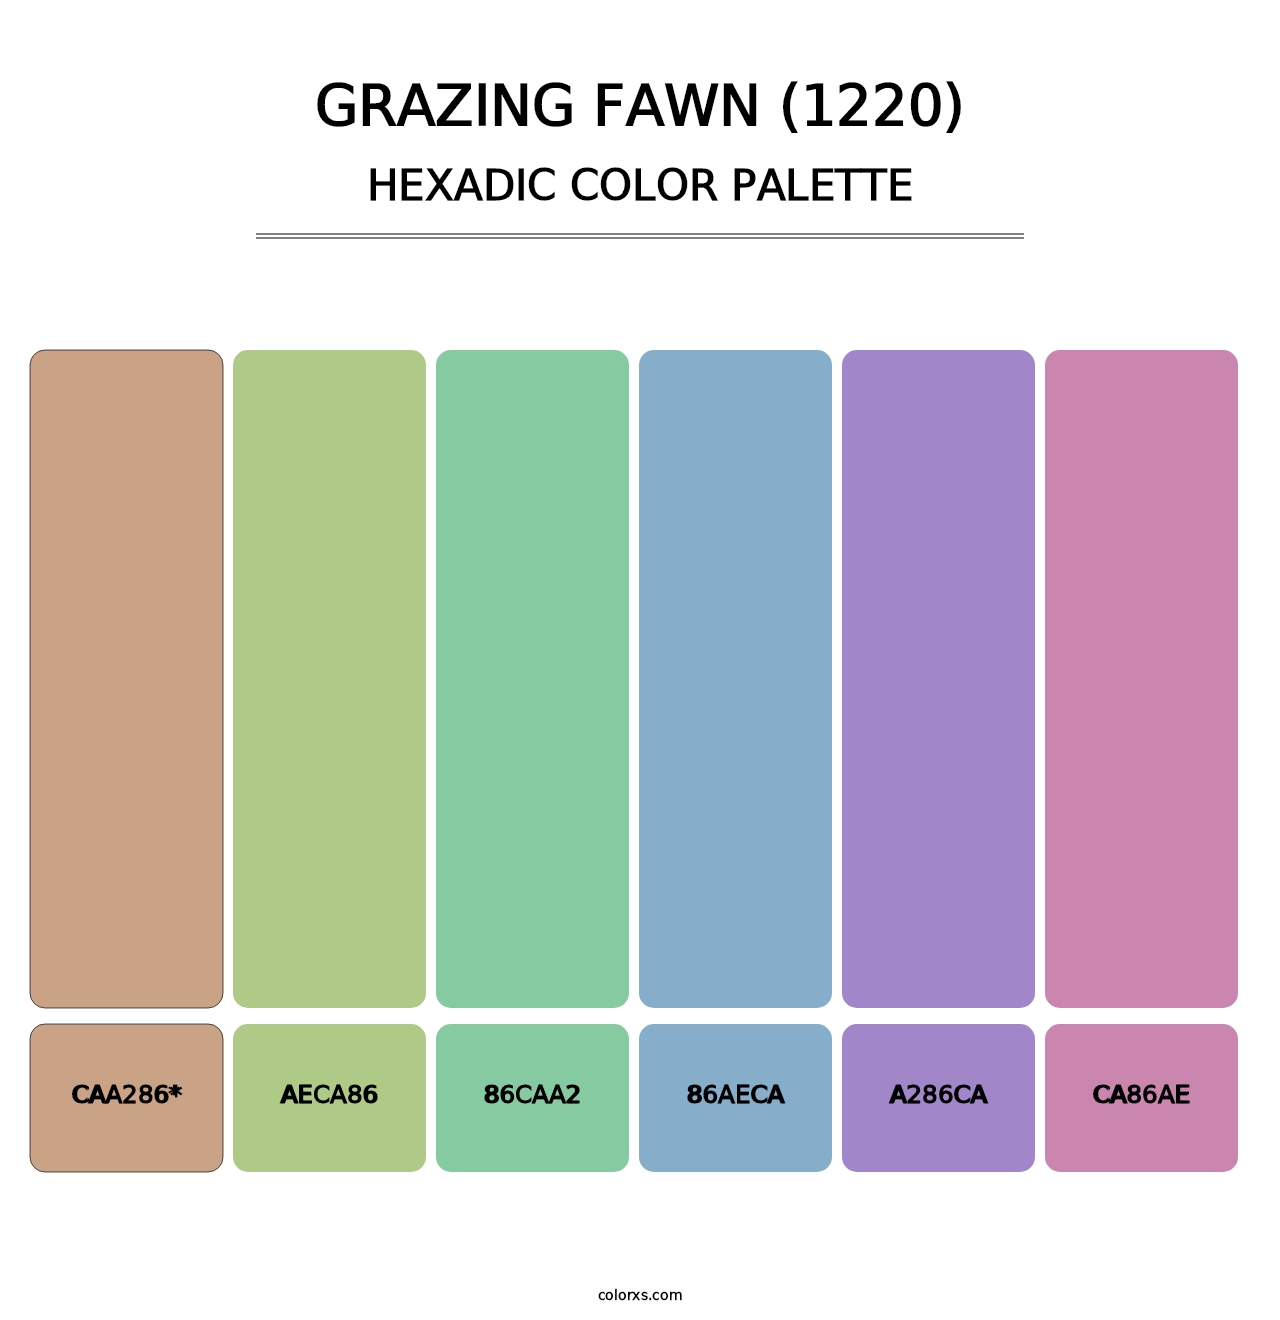 Grazing Fawn (1220) - Hexadic Color Palette